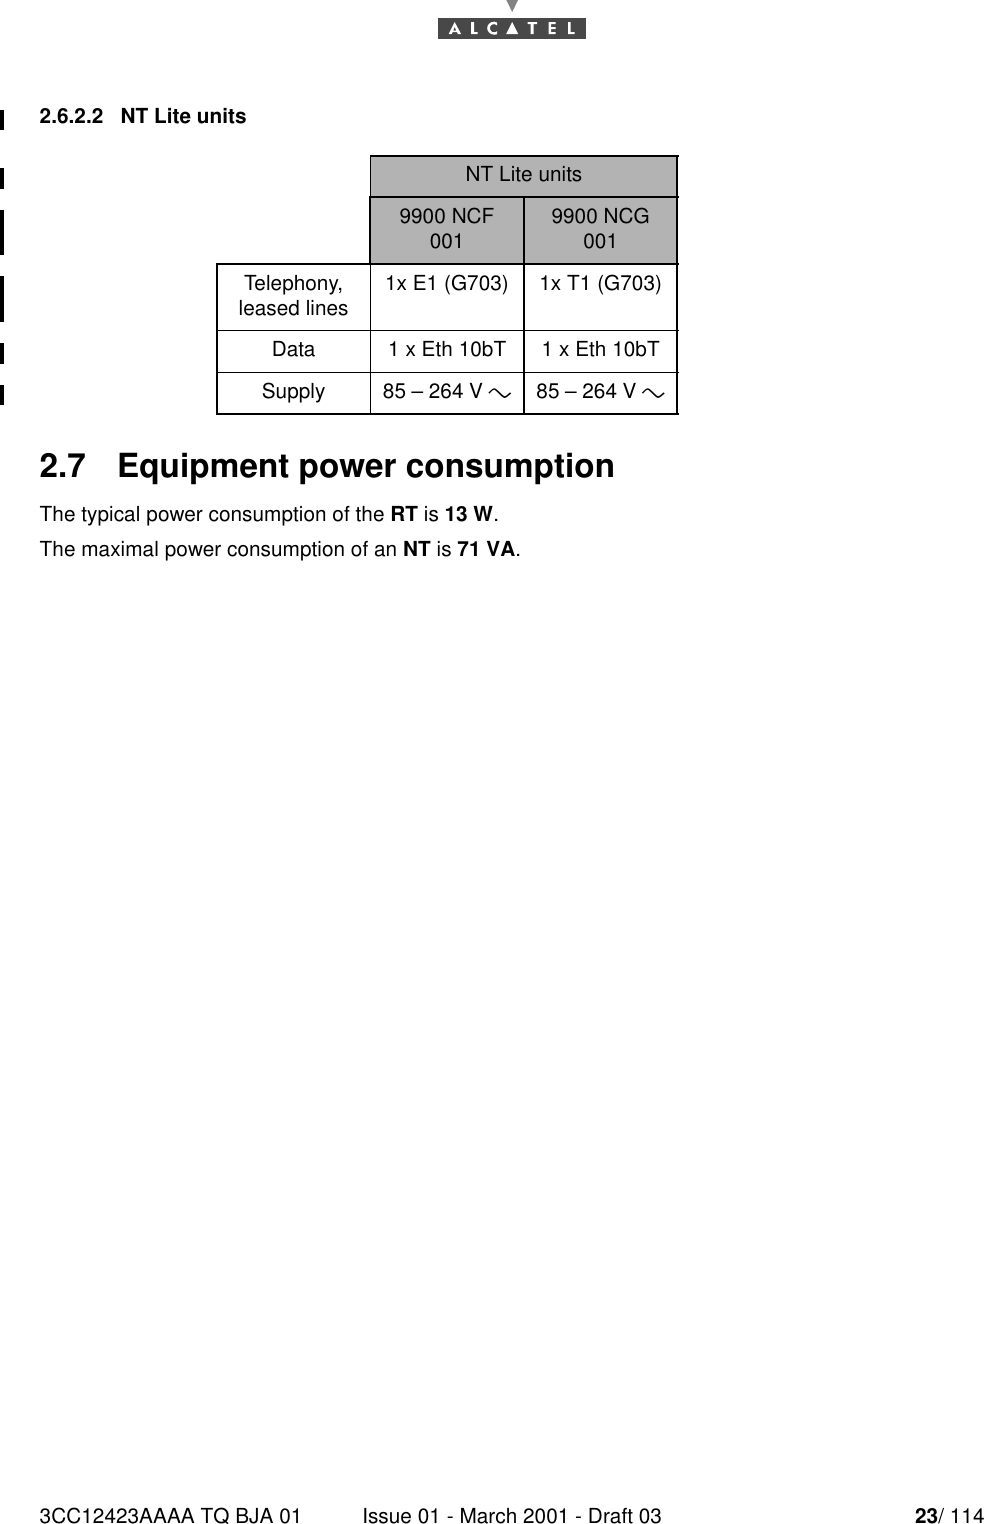 3CC12423AAAA TQ BJA 01 Issue 01 - March 2001 - Draft 03 23/ 114242.6.2.2   NT Lite units 2.7   Equipment power consumptionThe typical power consumption of the RT is 13 W.The maximal power consumption of an NT is 71 VA.NT Lite units9900 NCF 001 9900 NCG 001Telephony,leased lines 1x E1 (G703) 1x T1 (G703)Data 1 x Eth 10bT 1 x Eth 10bTSupply 85 – 264 V &quot;85 – 264 V &quot;